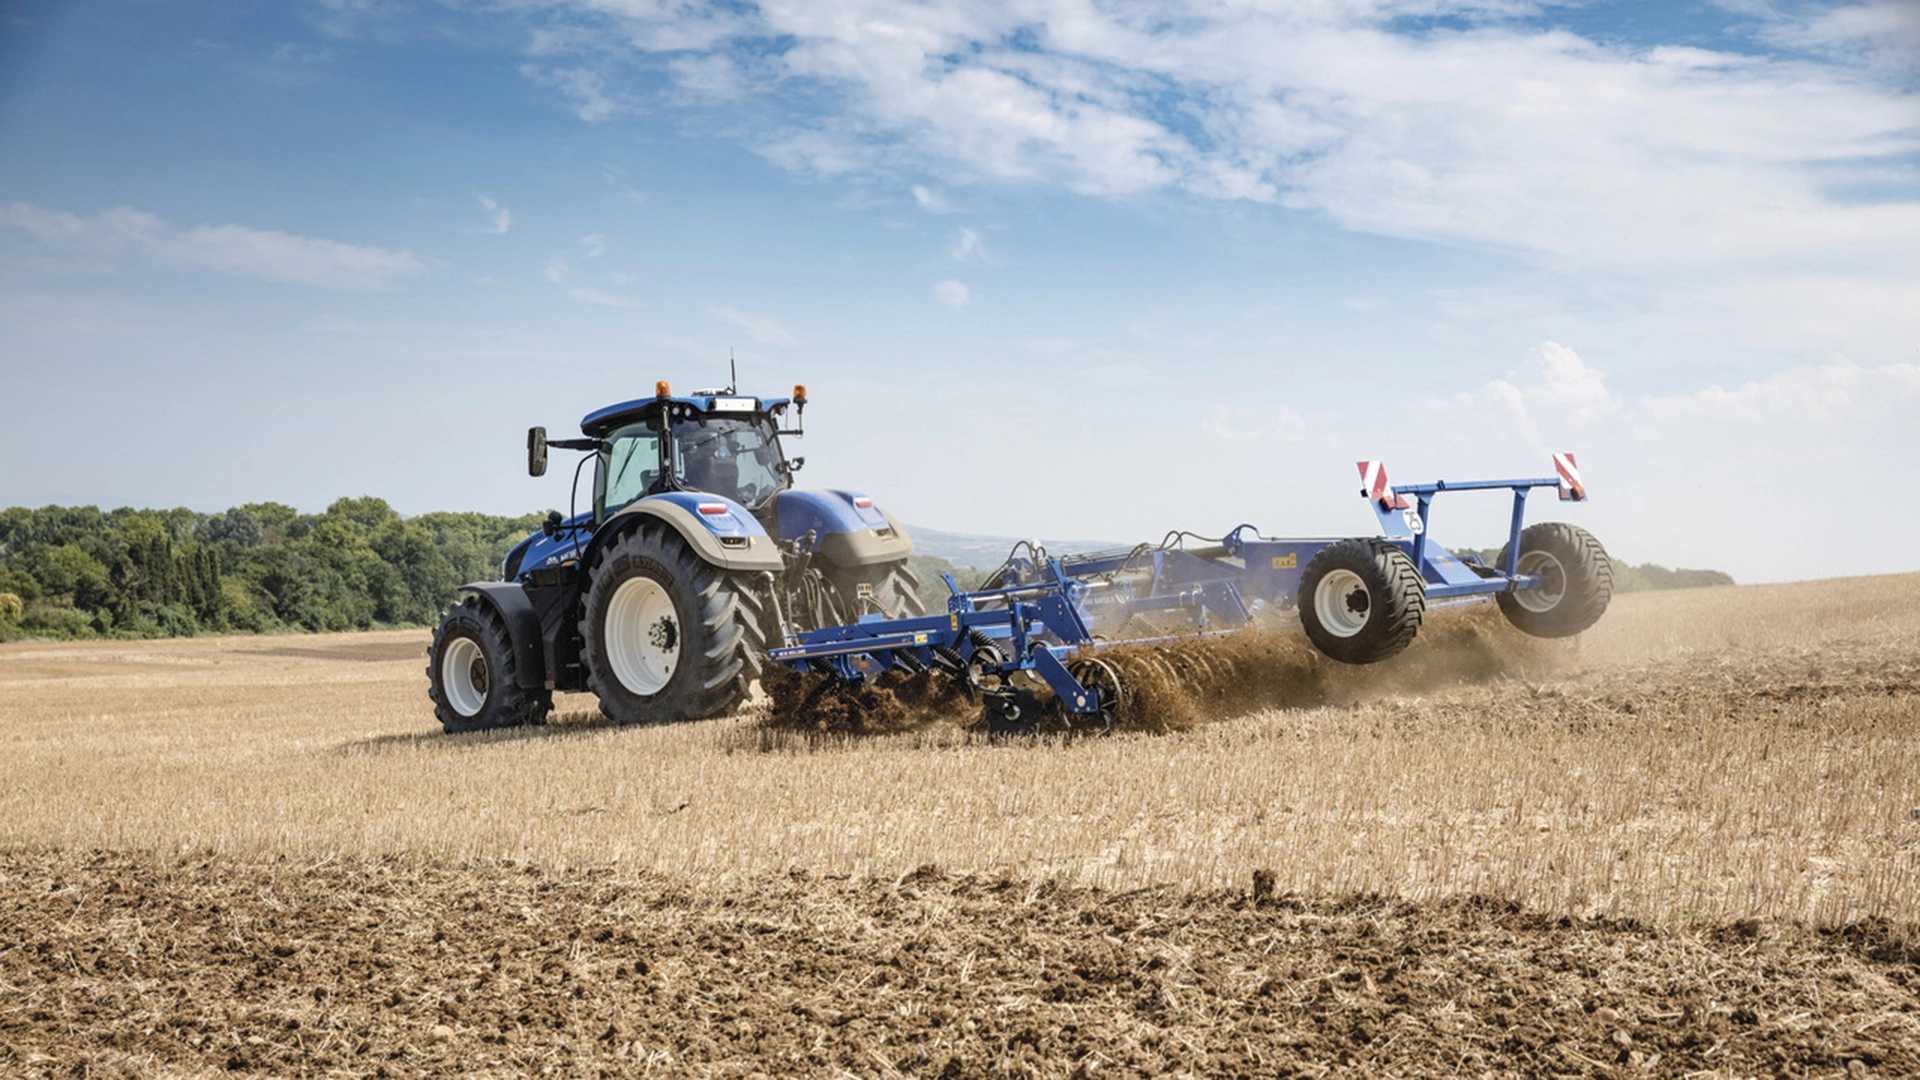 New Holland tractor employing a mounted stubble cultivator with rigid tine cultivator, discs and rear rollers on the field